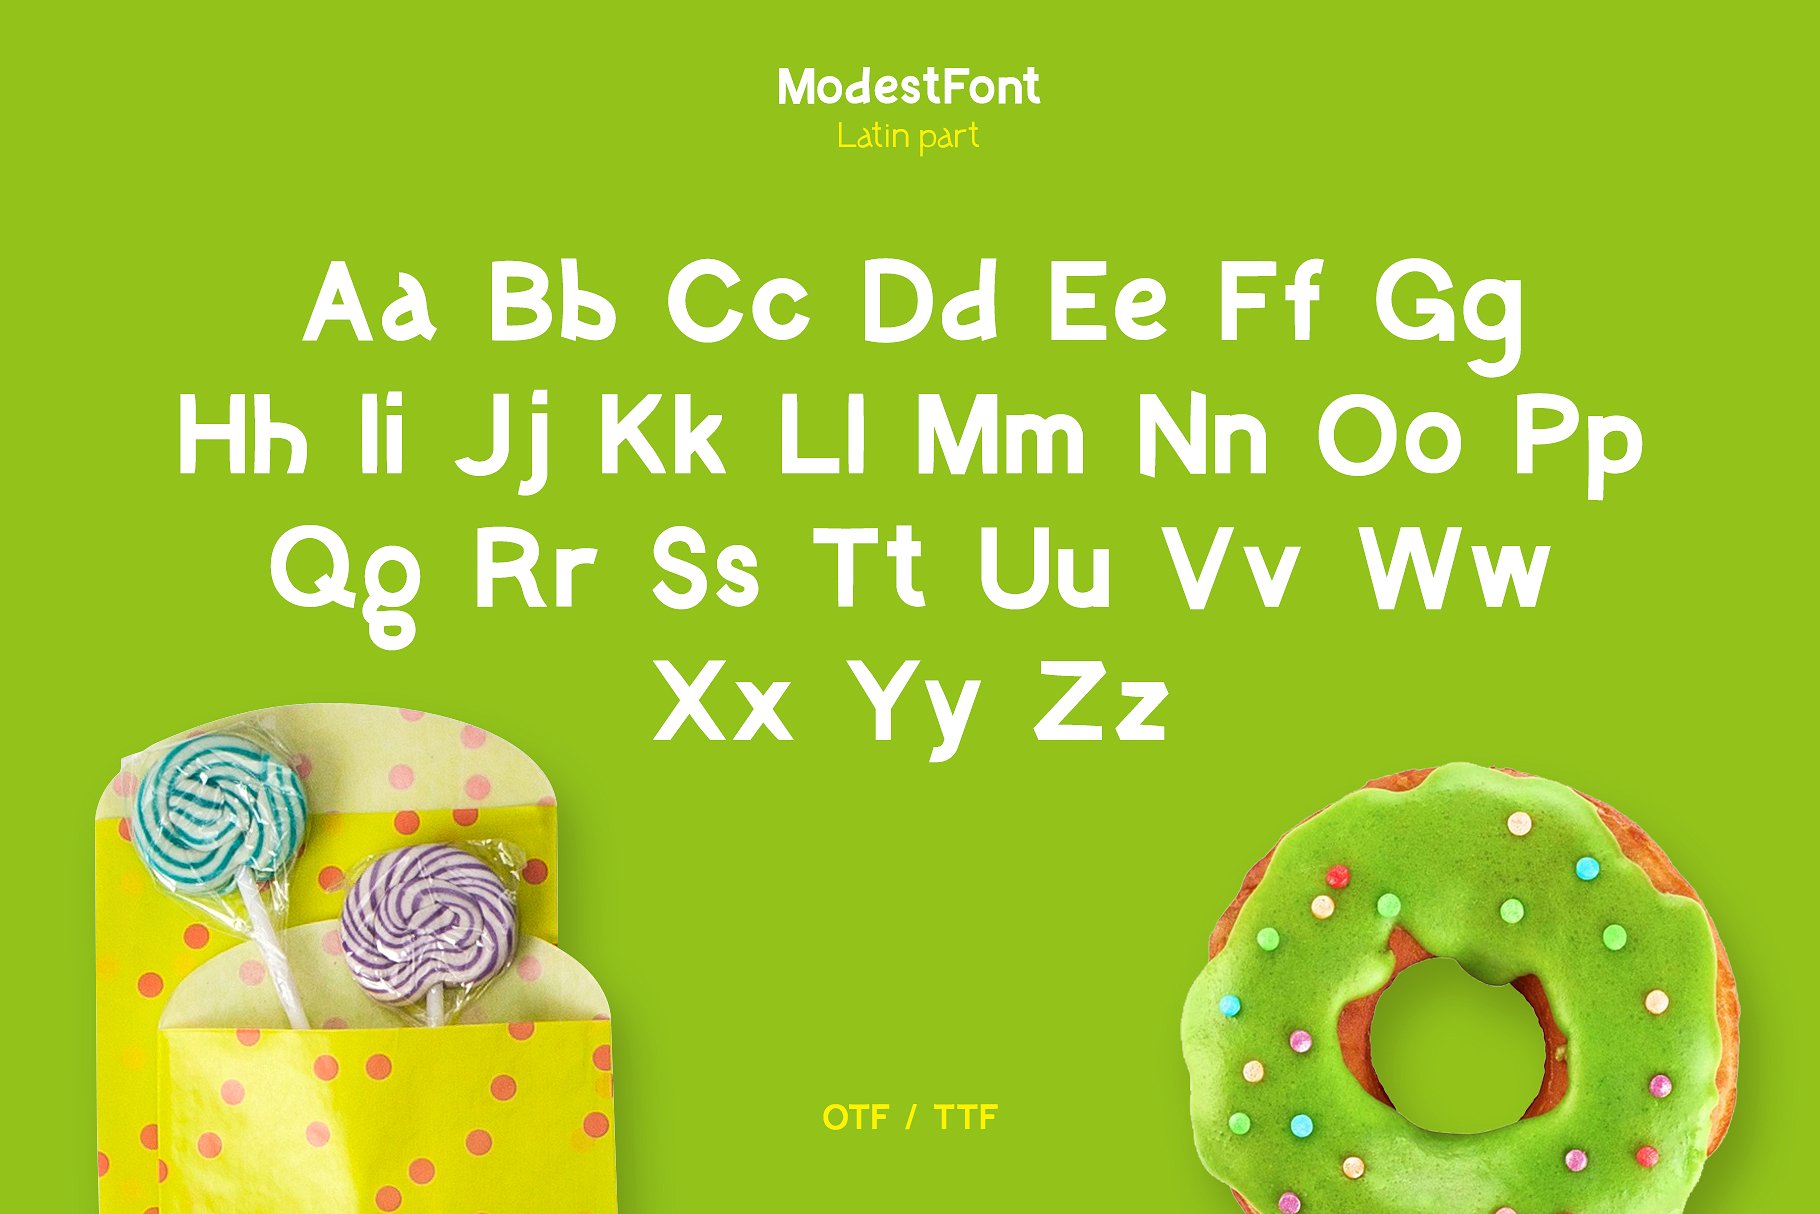 Example font Modest Font #9